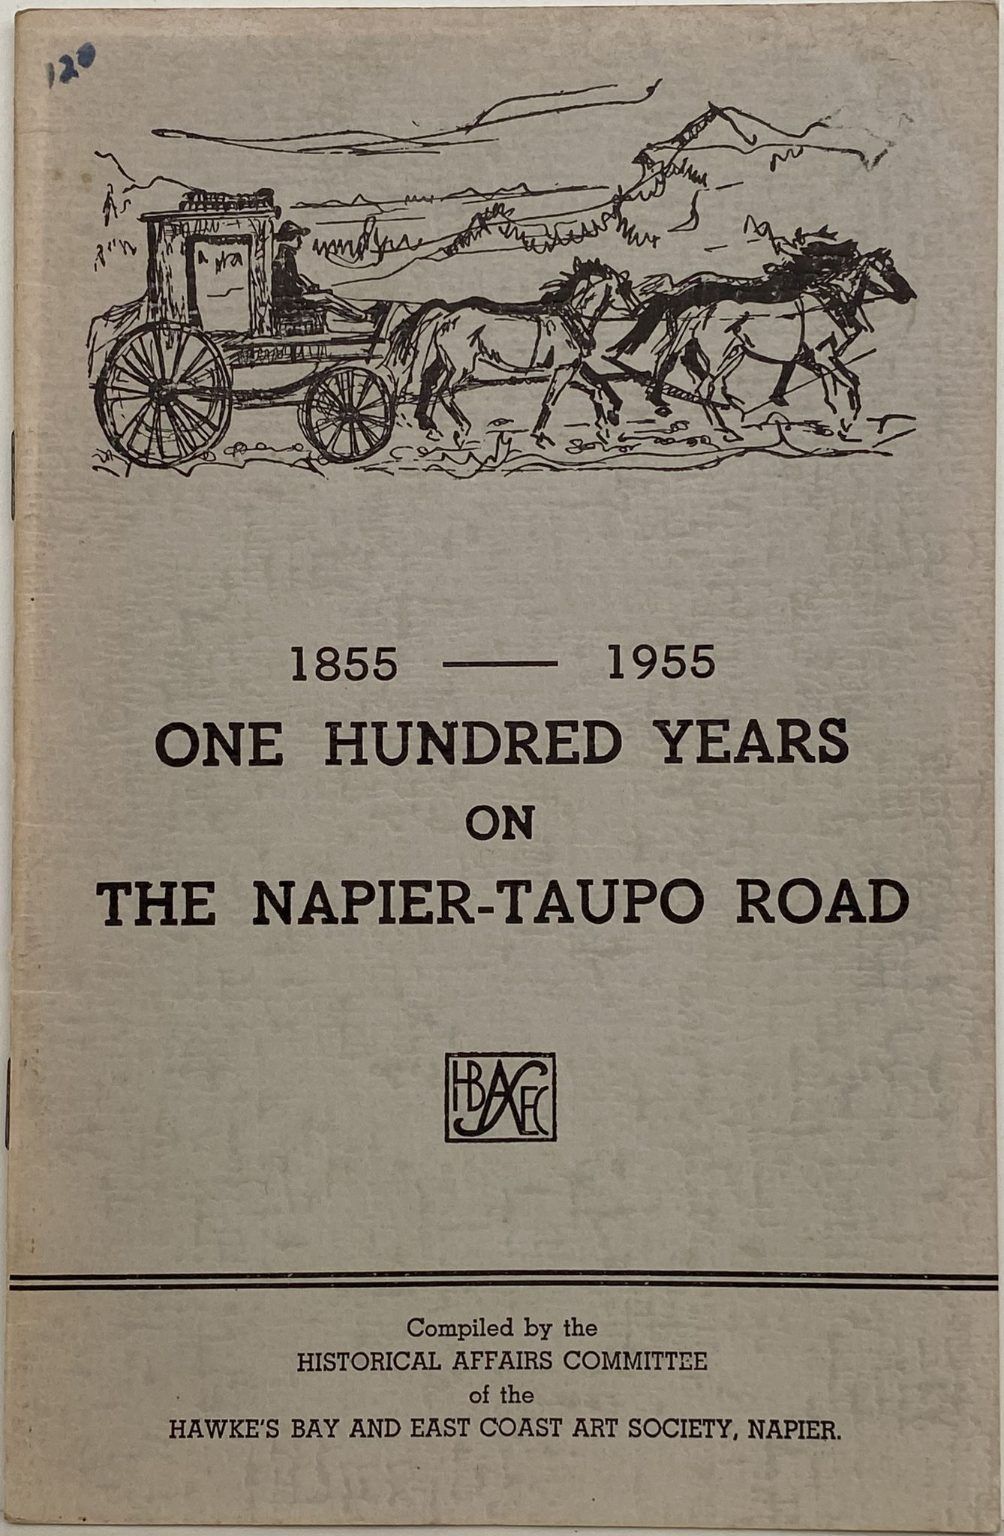 1855-1955 ONE HUNDRED YEARS: On the Napier - Taupo Road